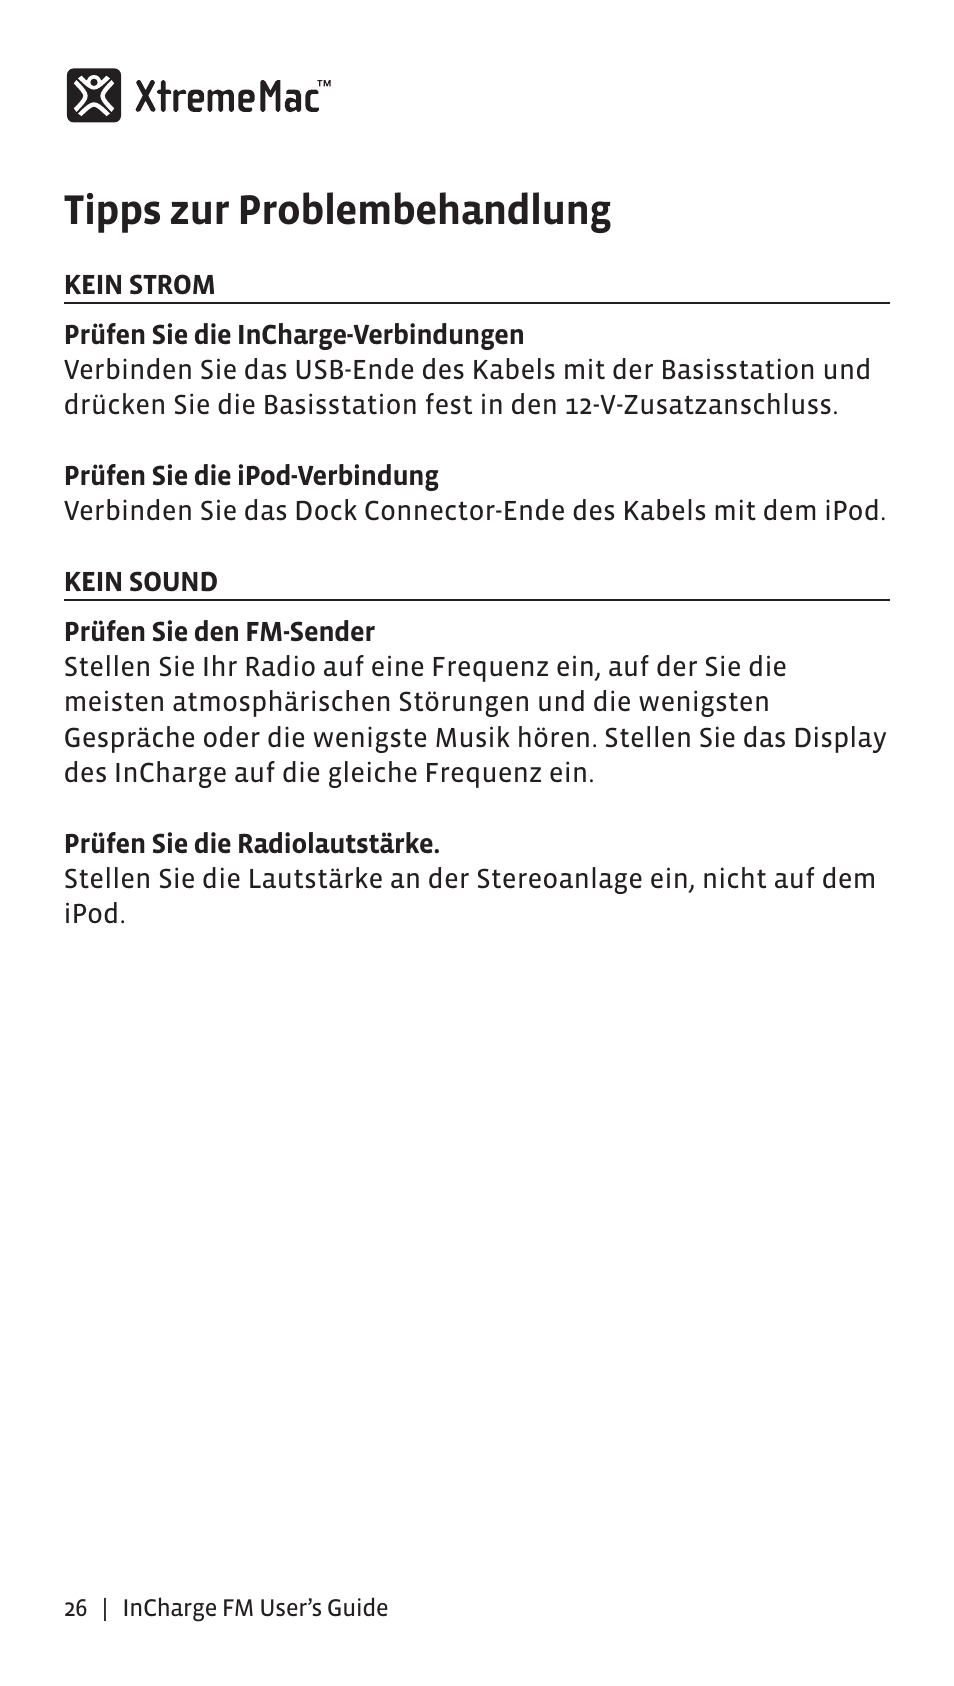 Tipps zur problembehandlung | XtremeMac Incharge FM User Manual | Page 25 / 35